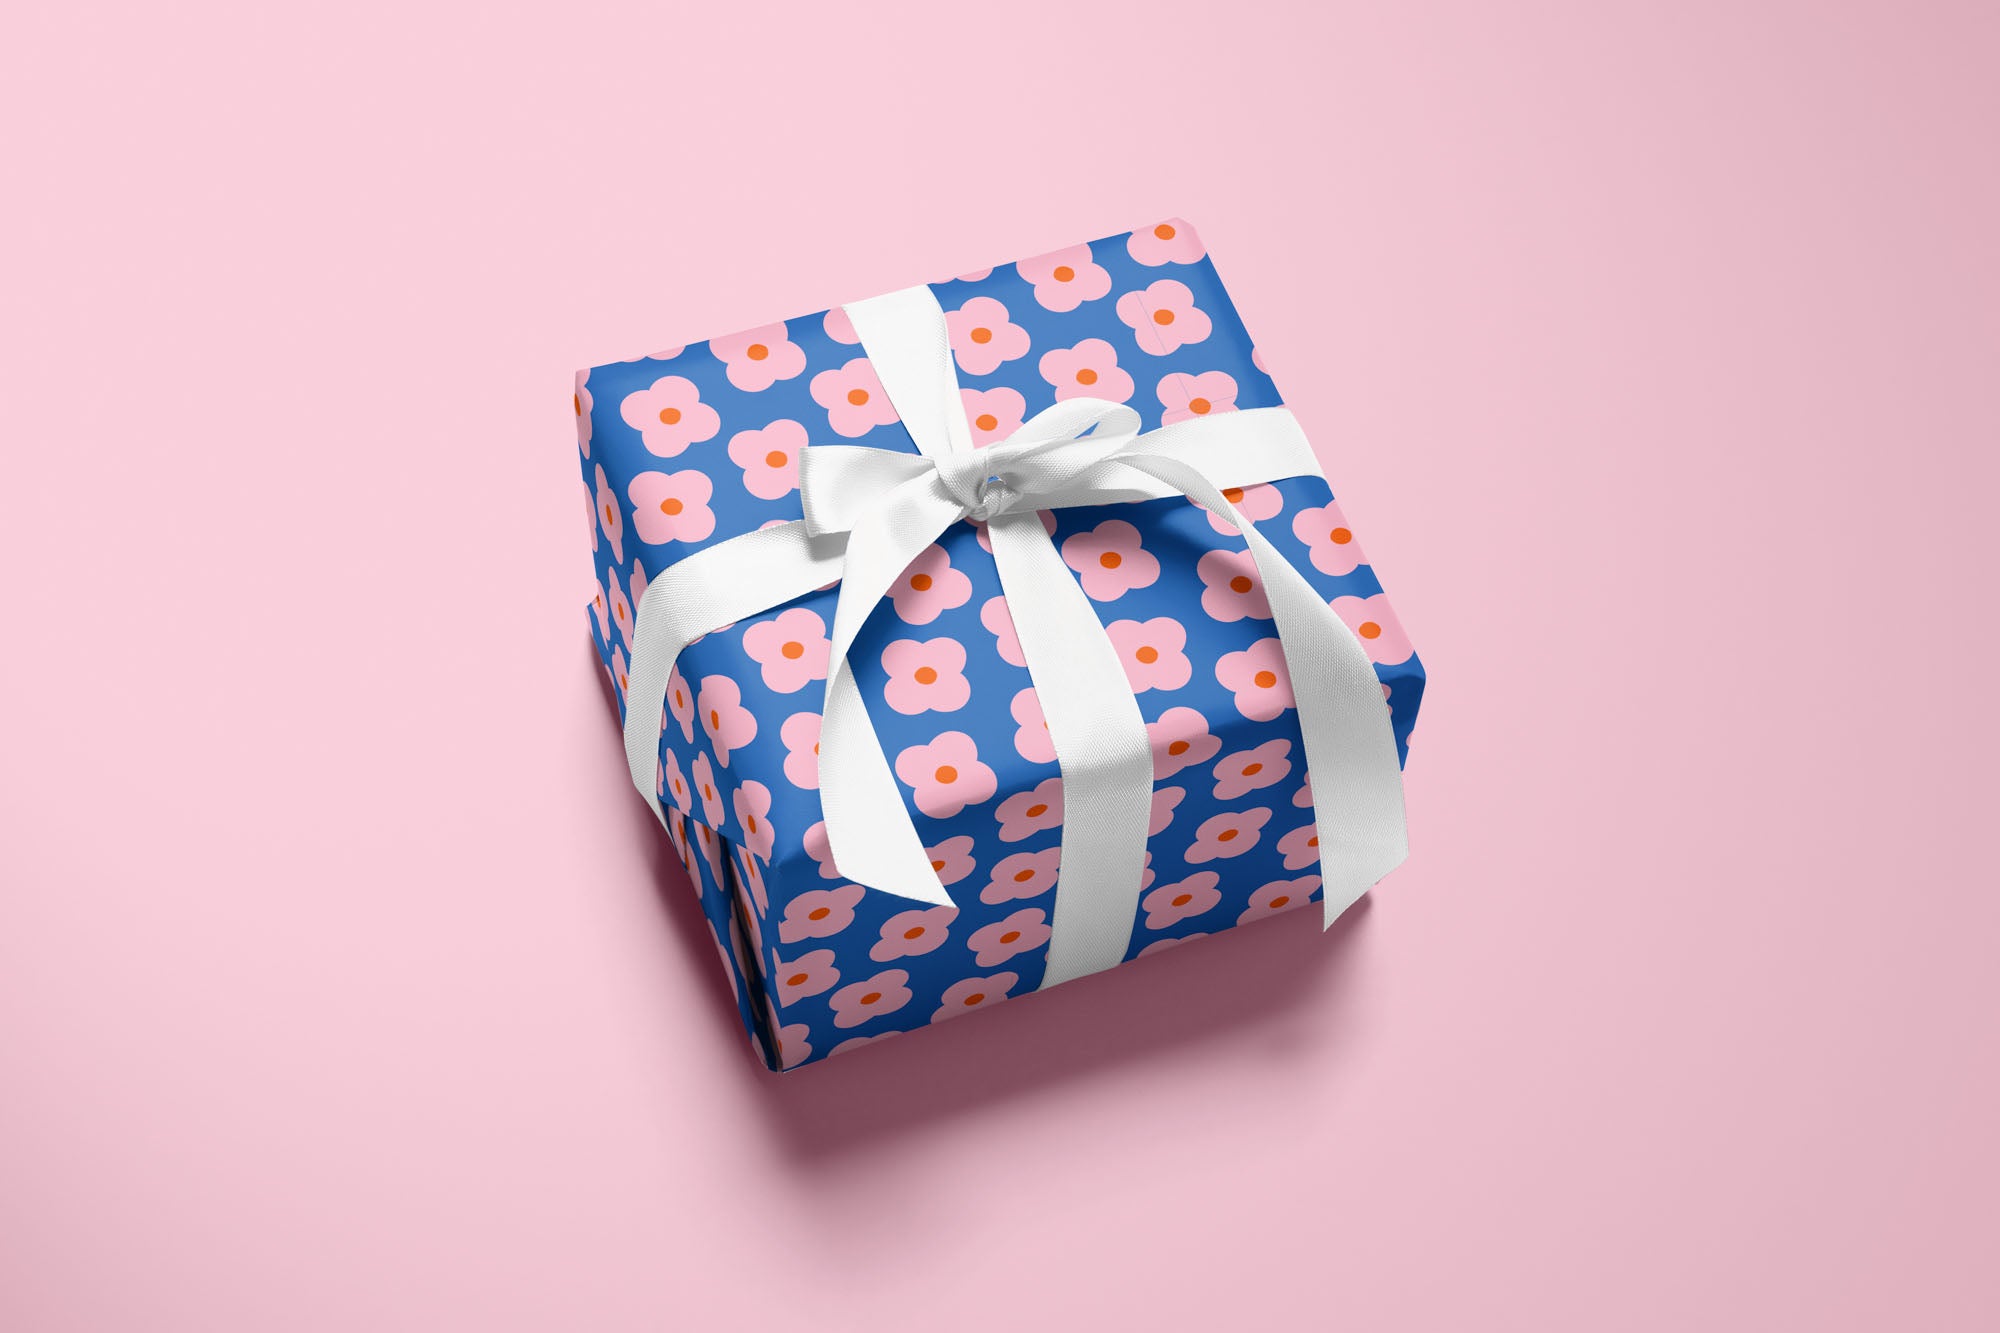 Floral Gift Wrap